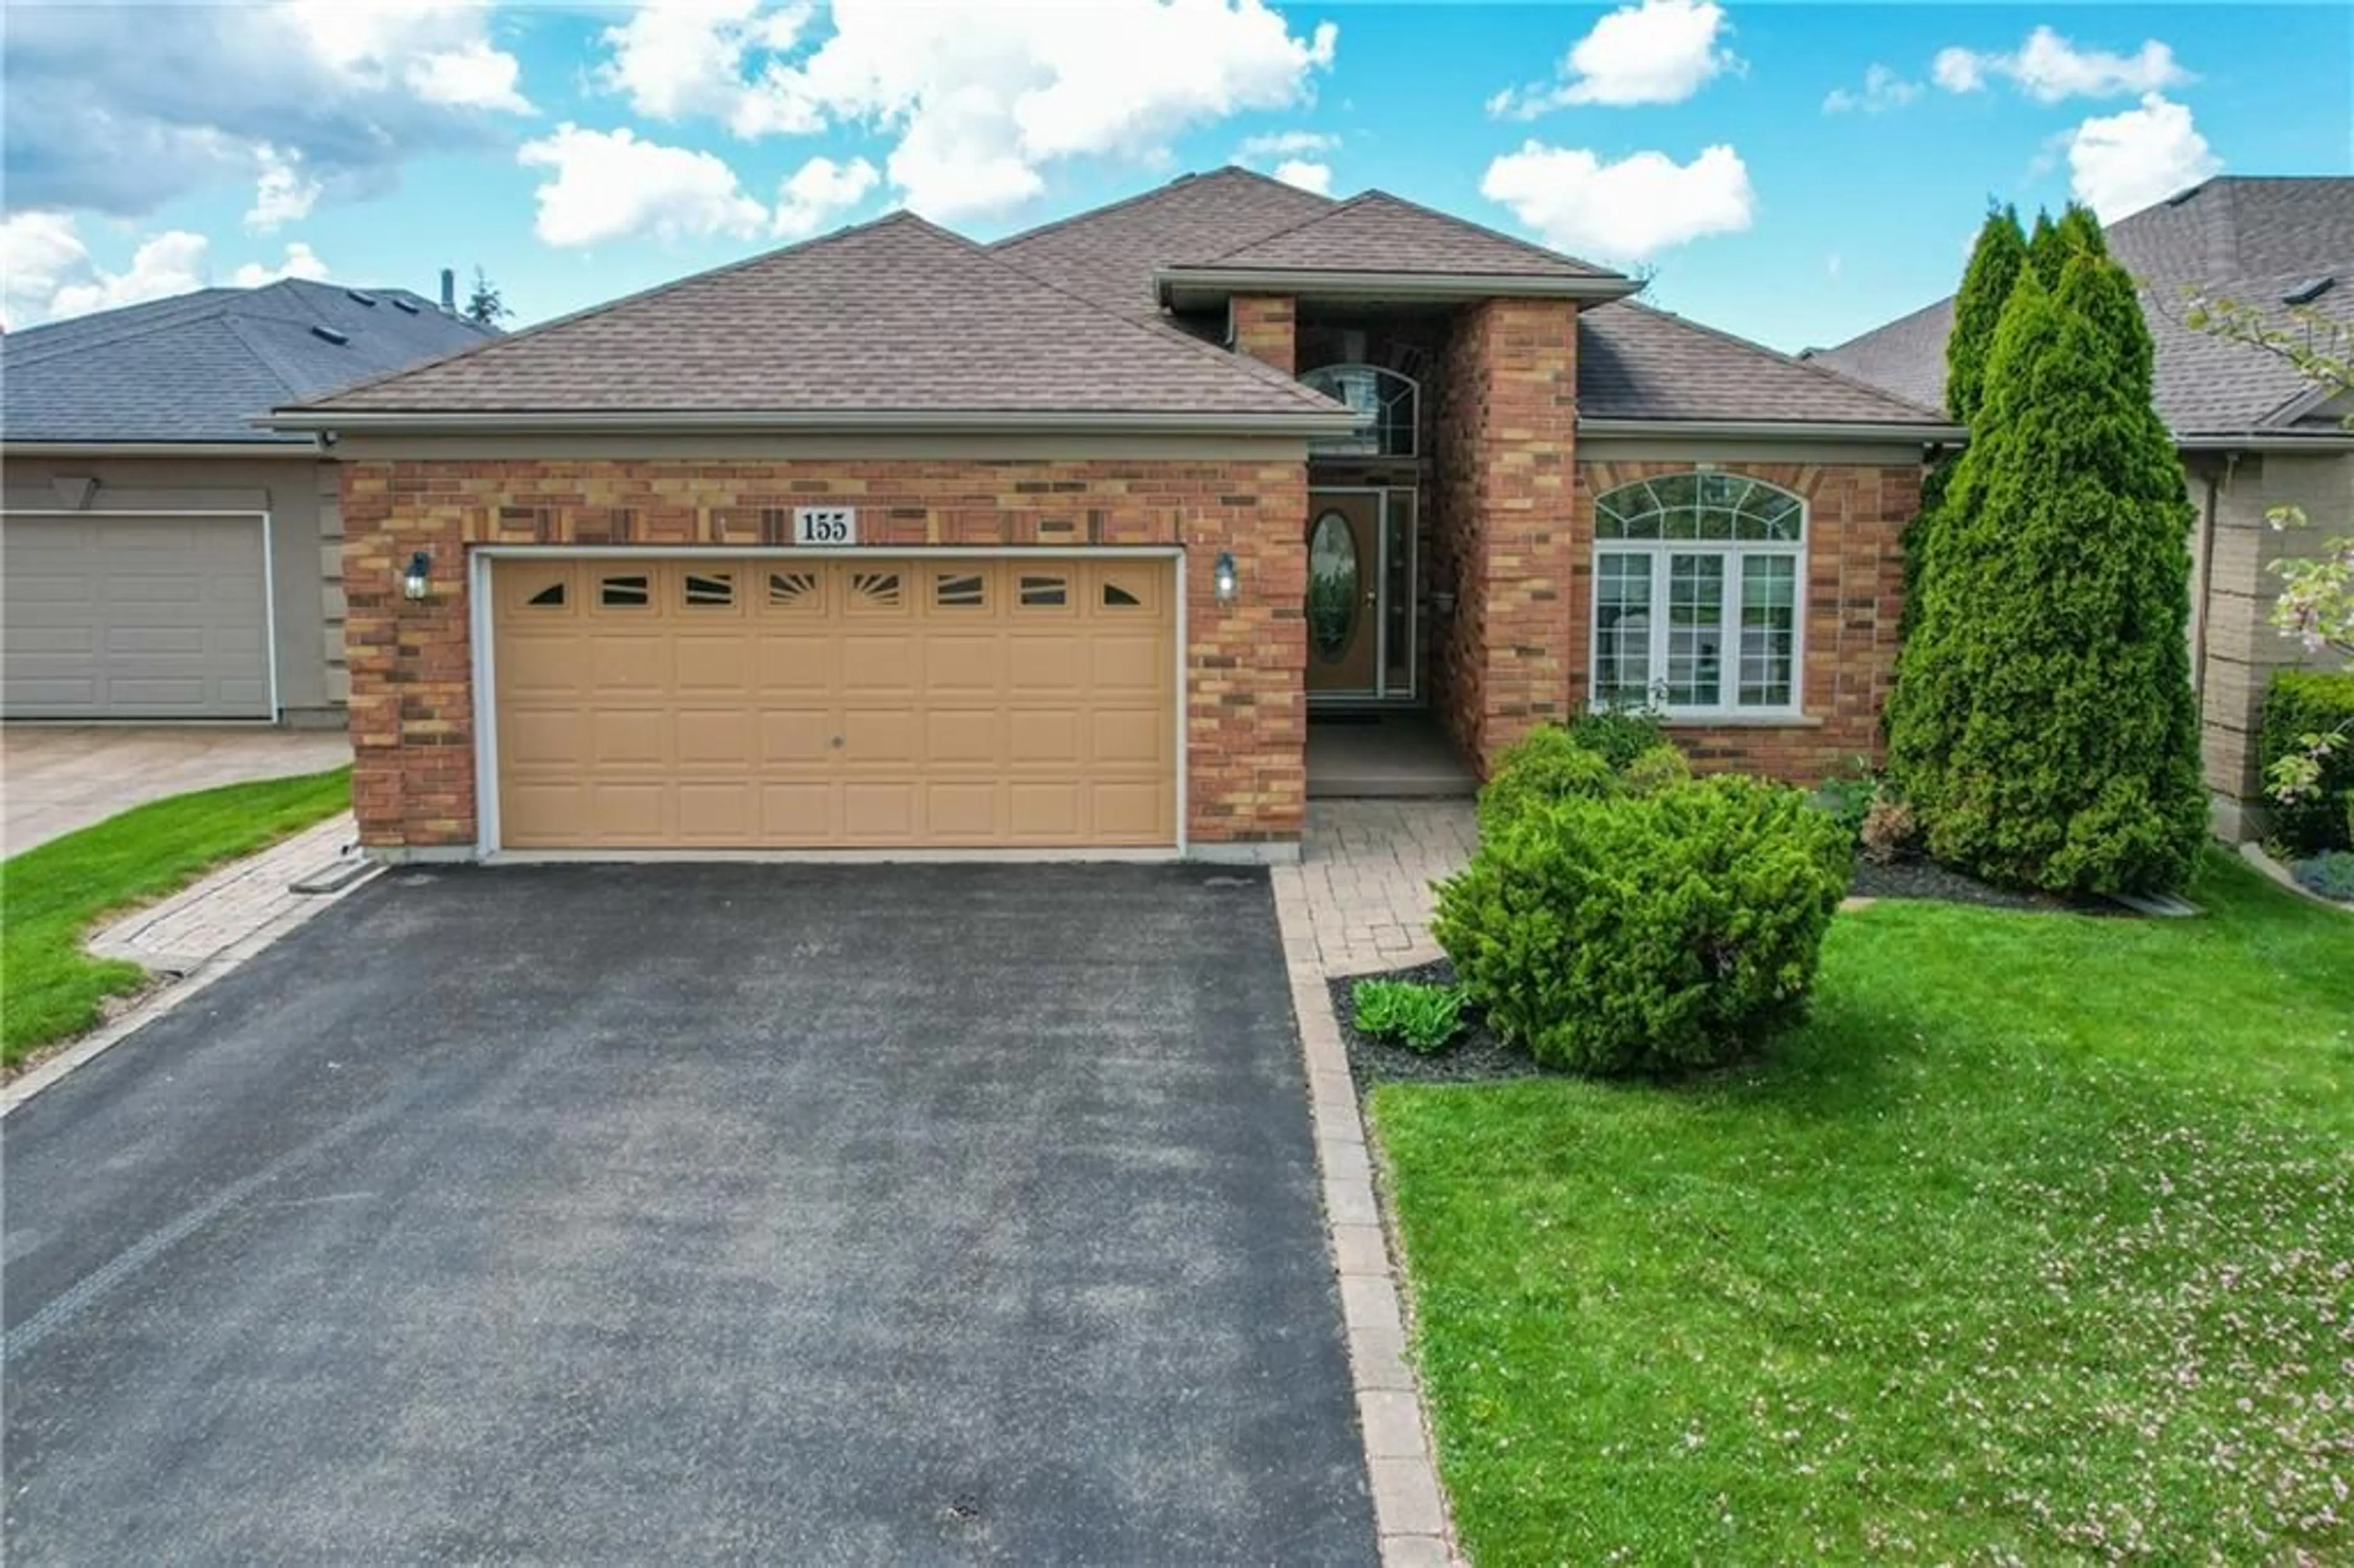 Home with brick exterior material for 155 MUIRFIELD Trail, Welland Ontario L3B 6G7